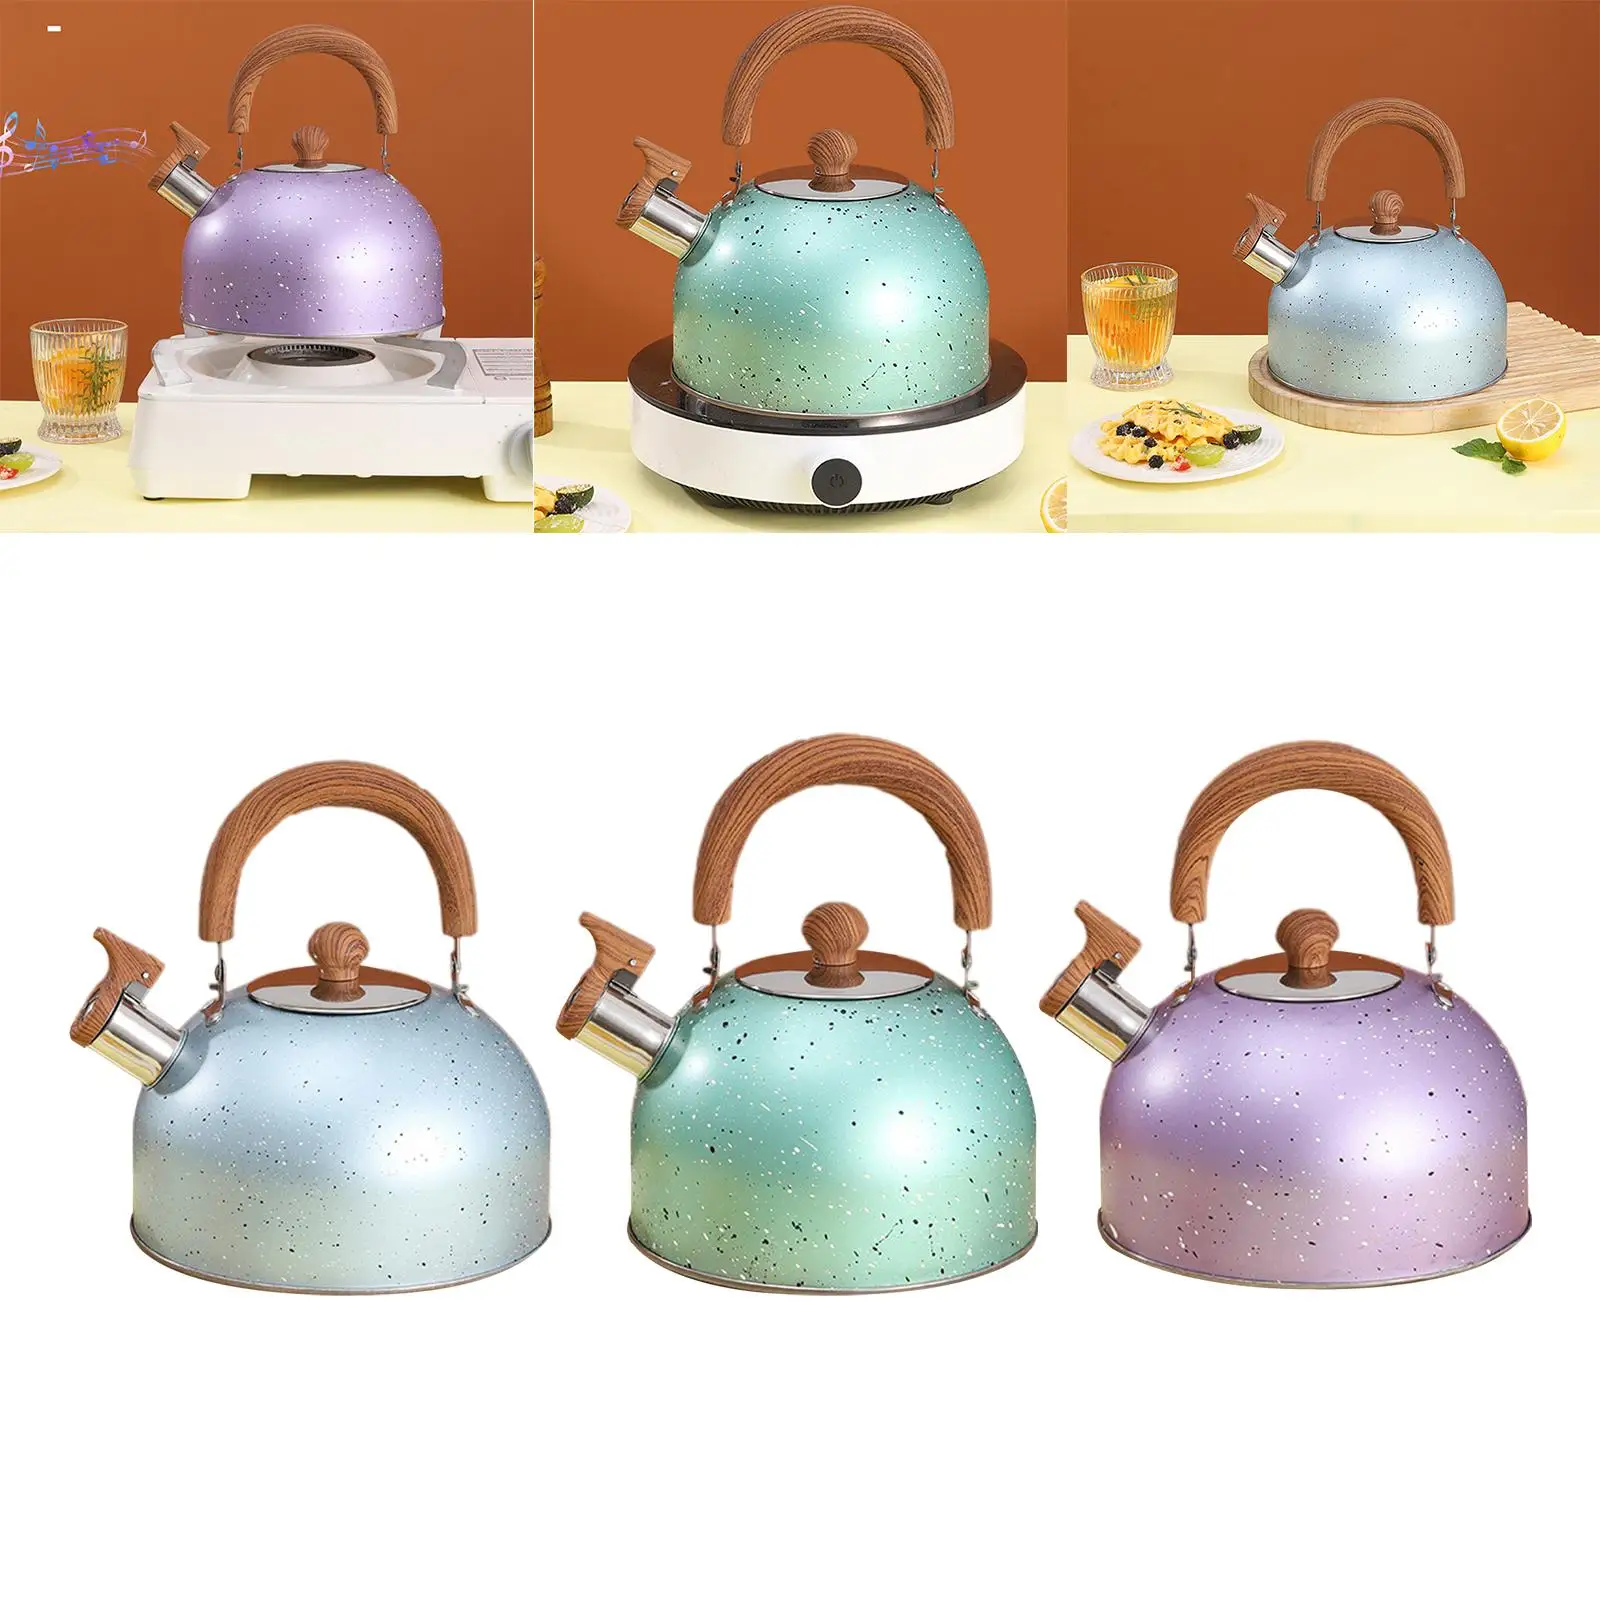 Stainless Steel Audible Whistling Water Kettle Anti Heat Handle Kitchenware Coffee Kettle 4L Tea Kettle for Induction Cookers